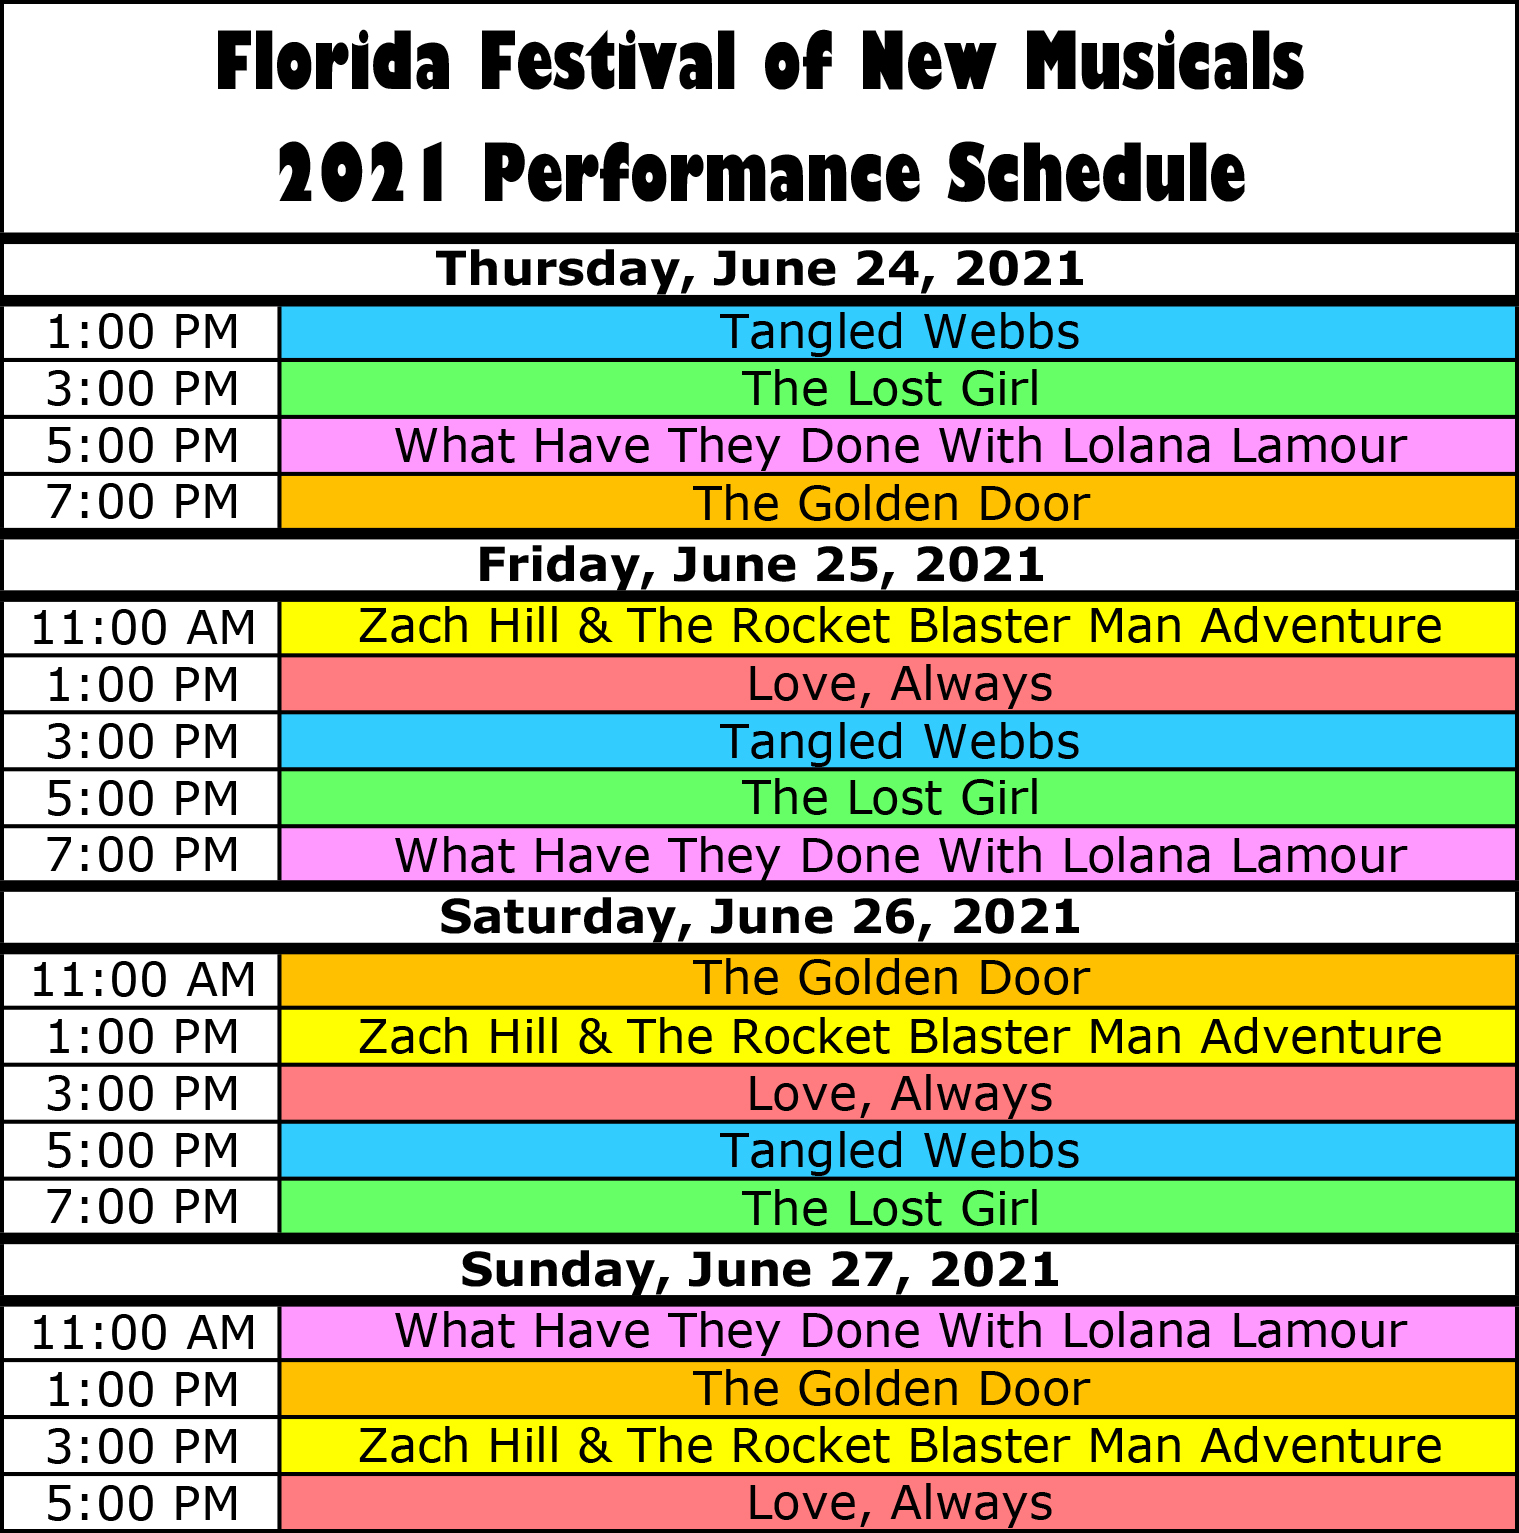 Festival Schedule, call 407-645-0145 for assistance